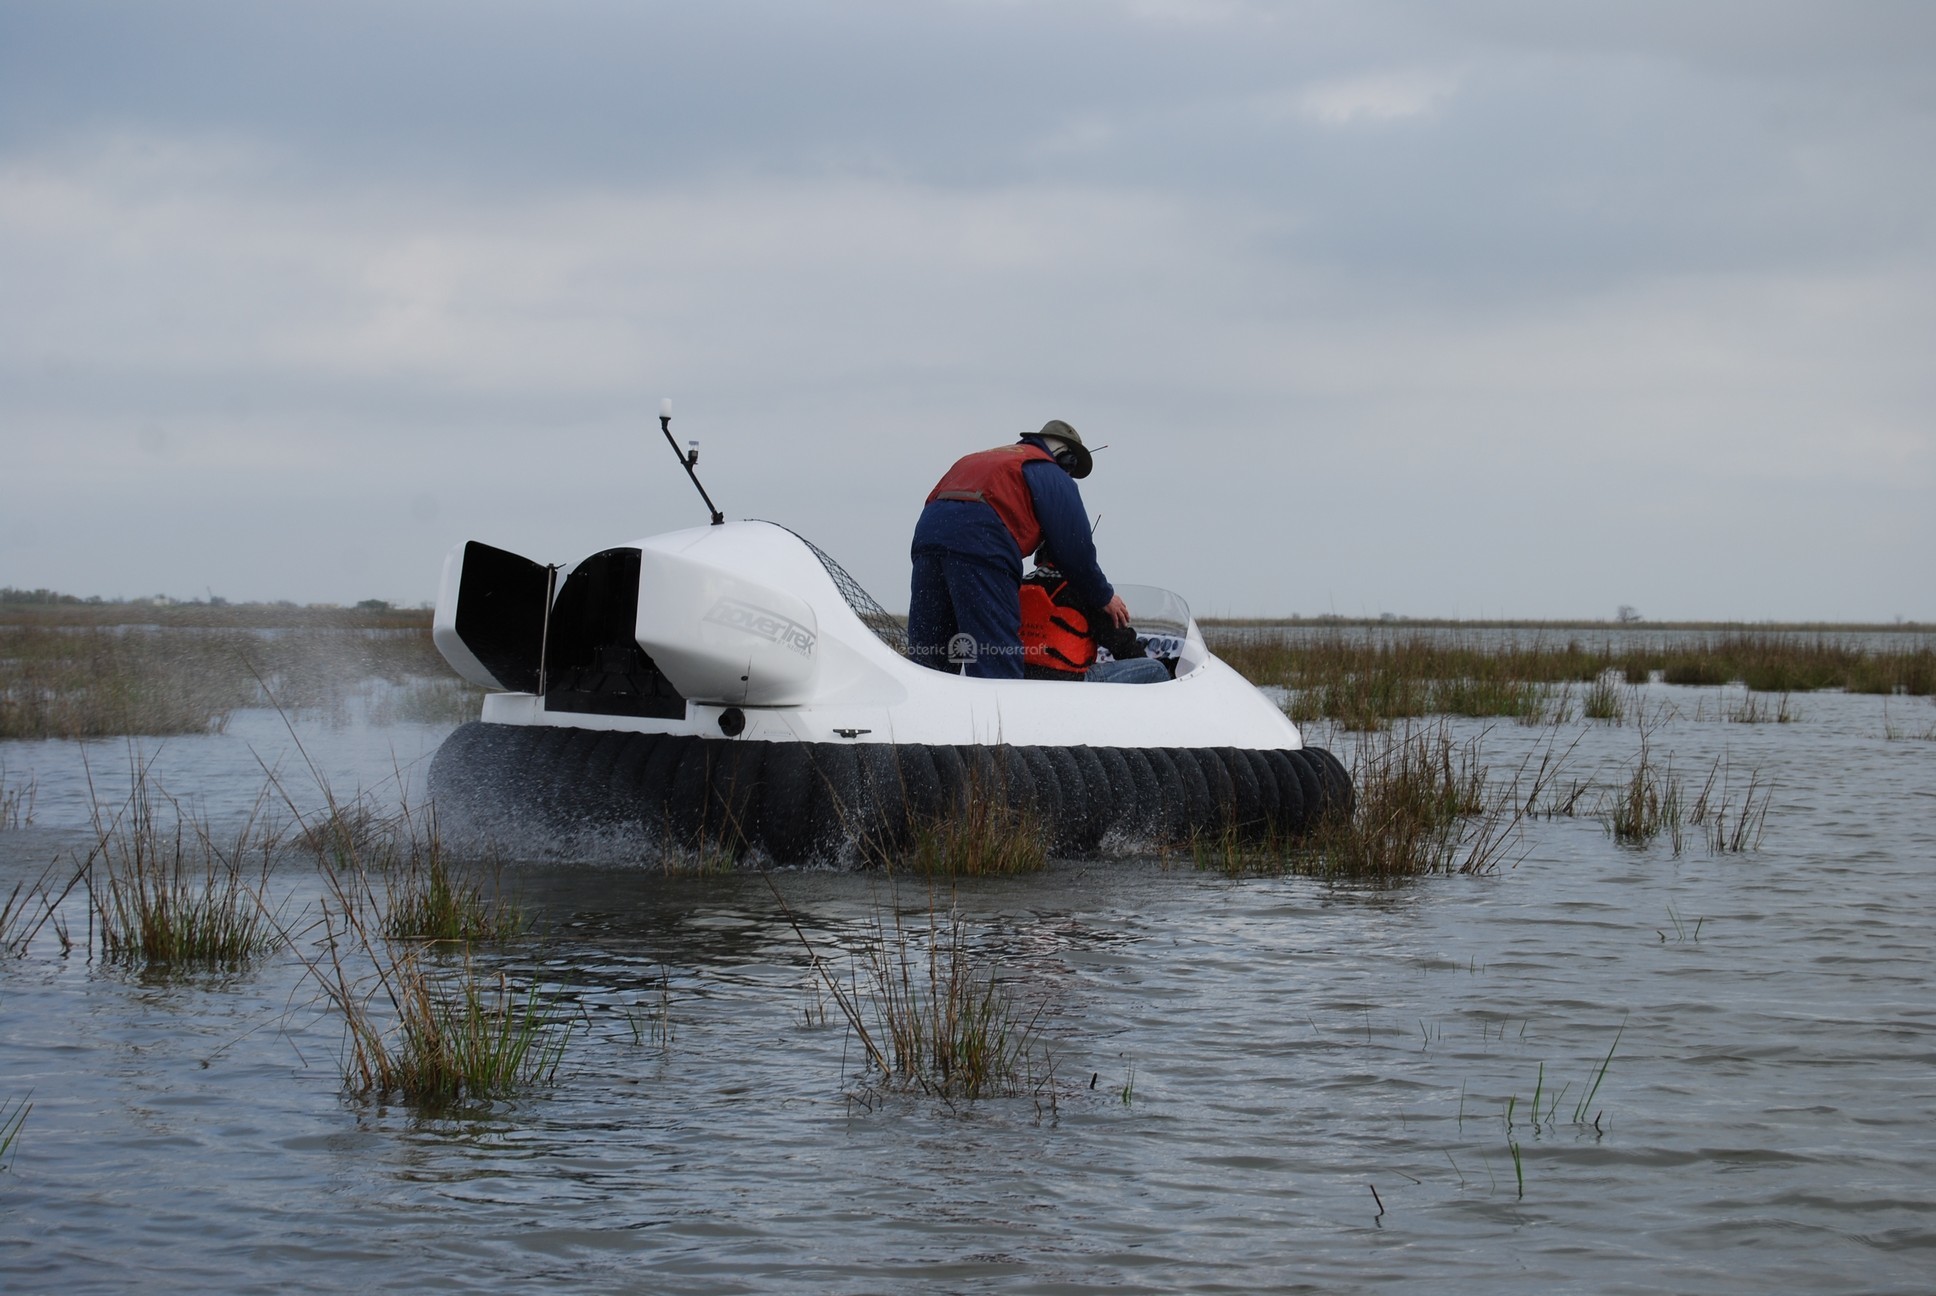 Neoteric Commercial Hovercraft training in tall grass marsh